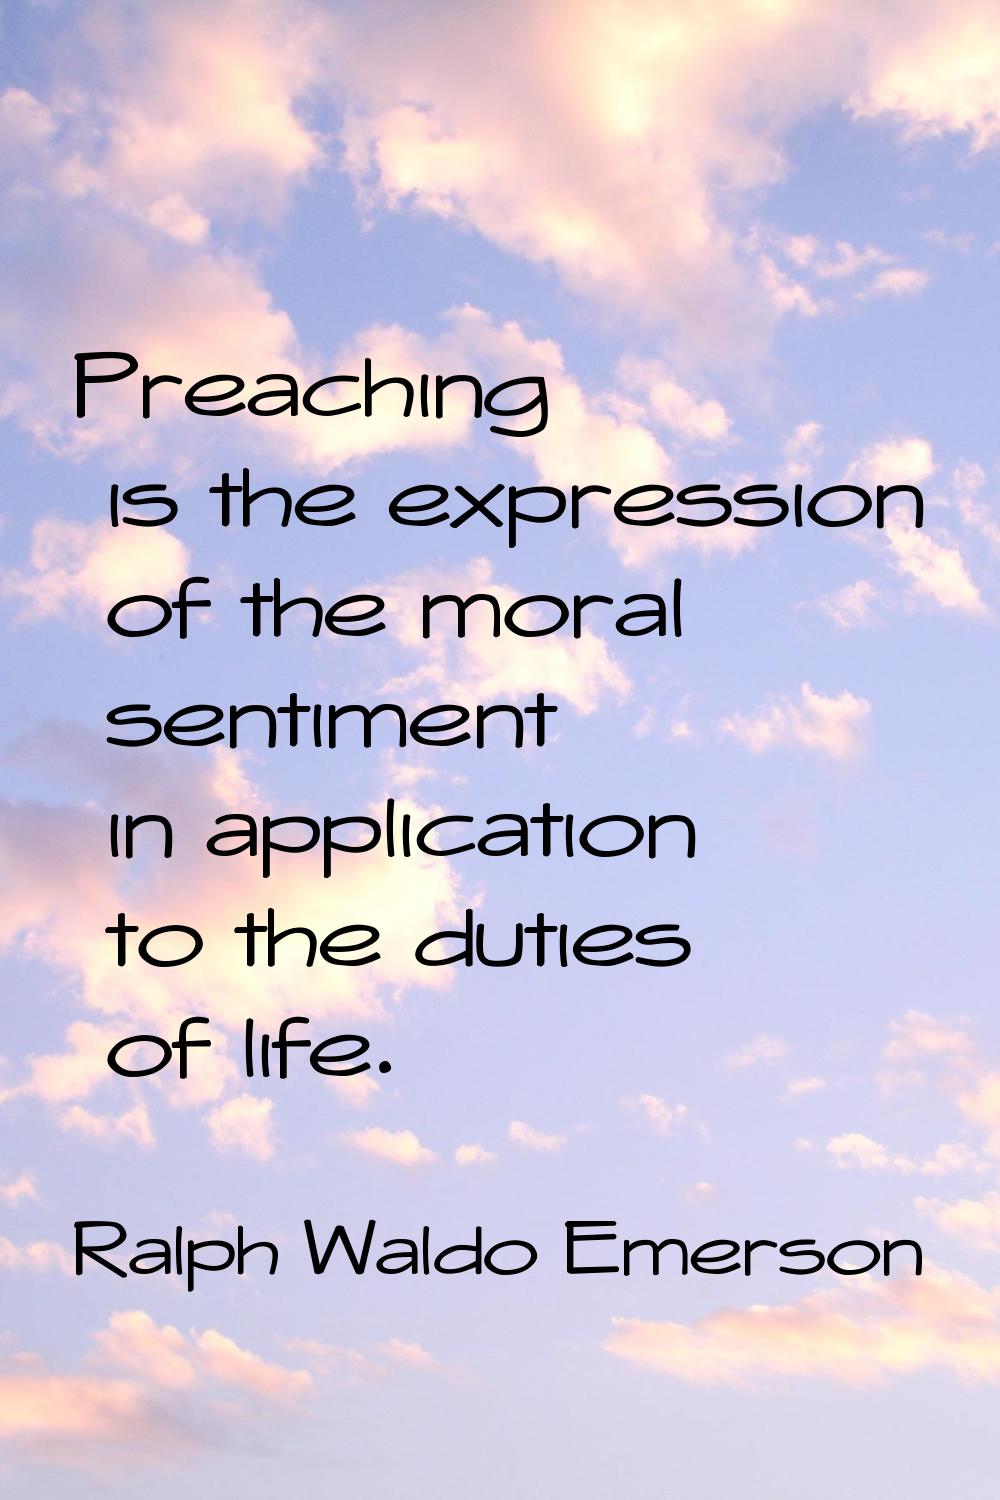 Preaching is the expression of the moral sentiment in application to the duties of life.